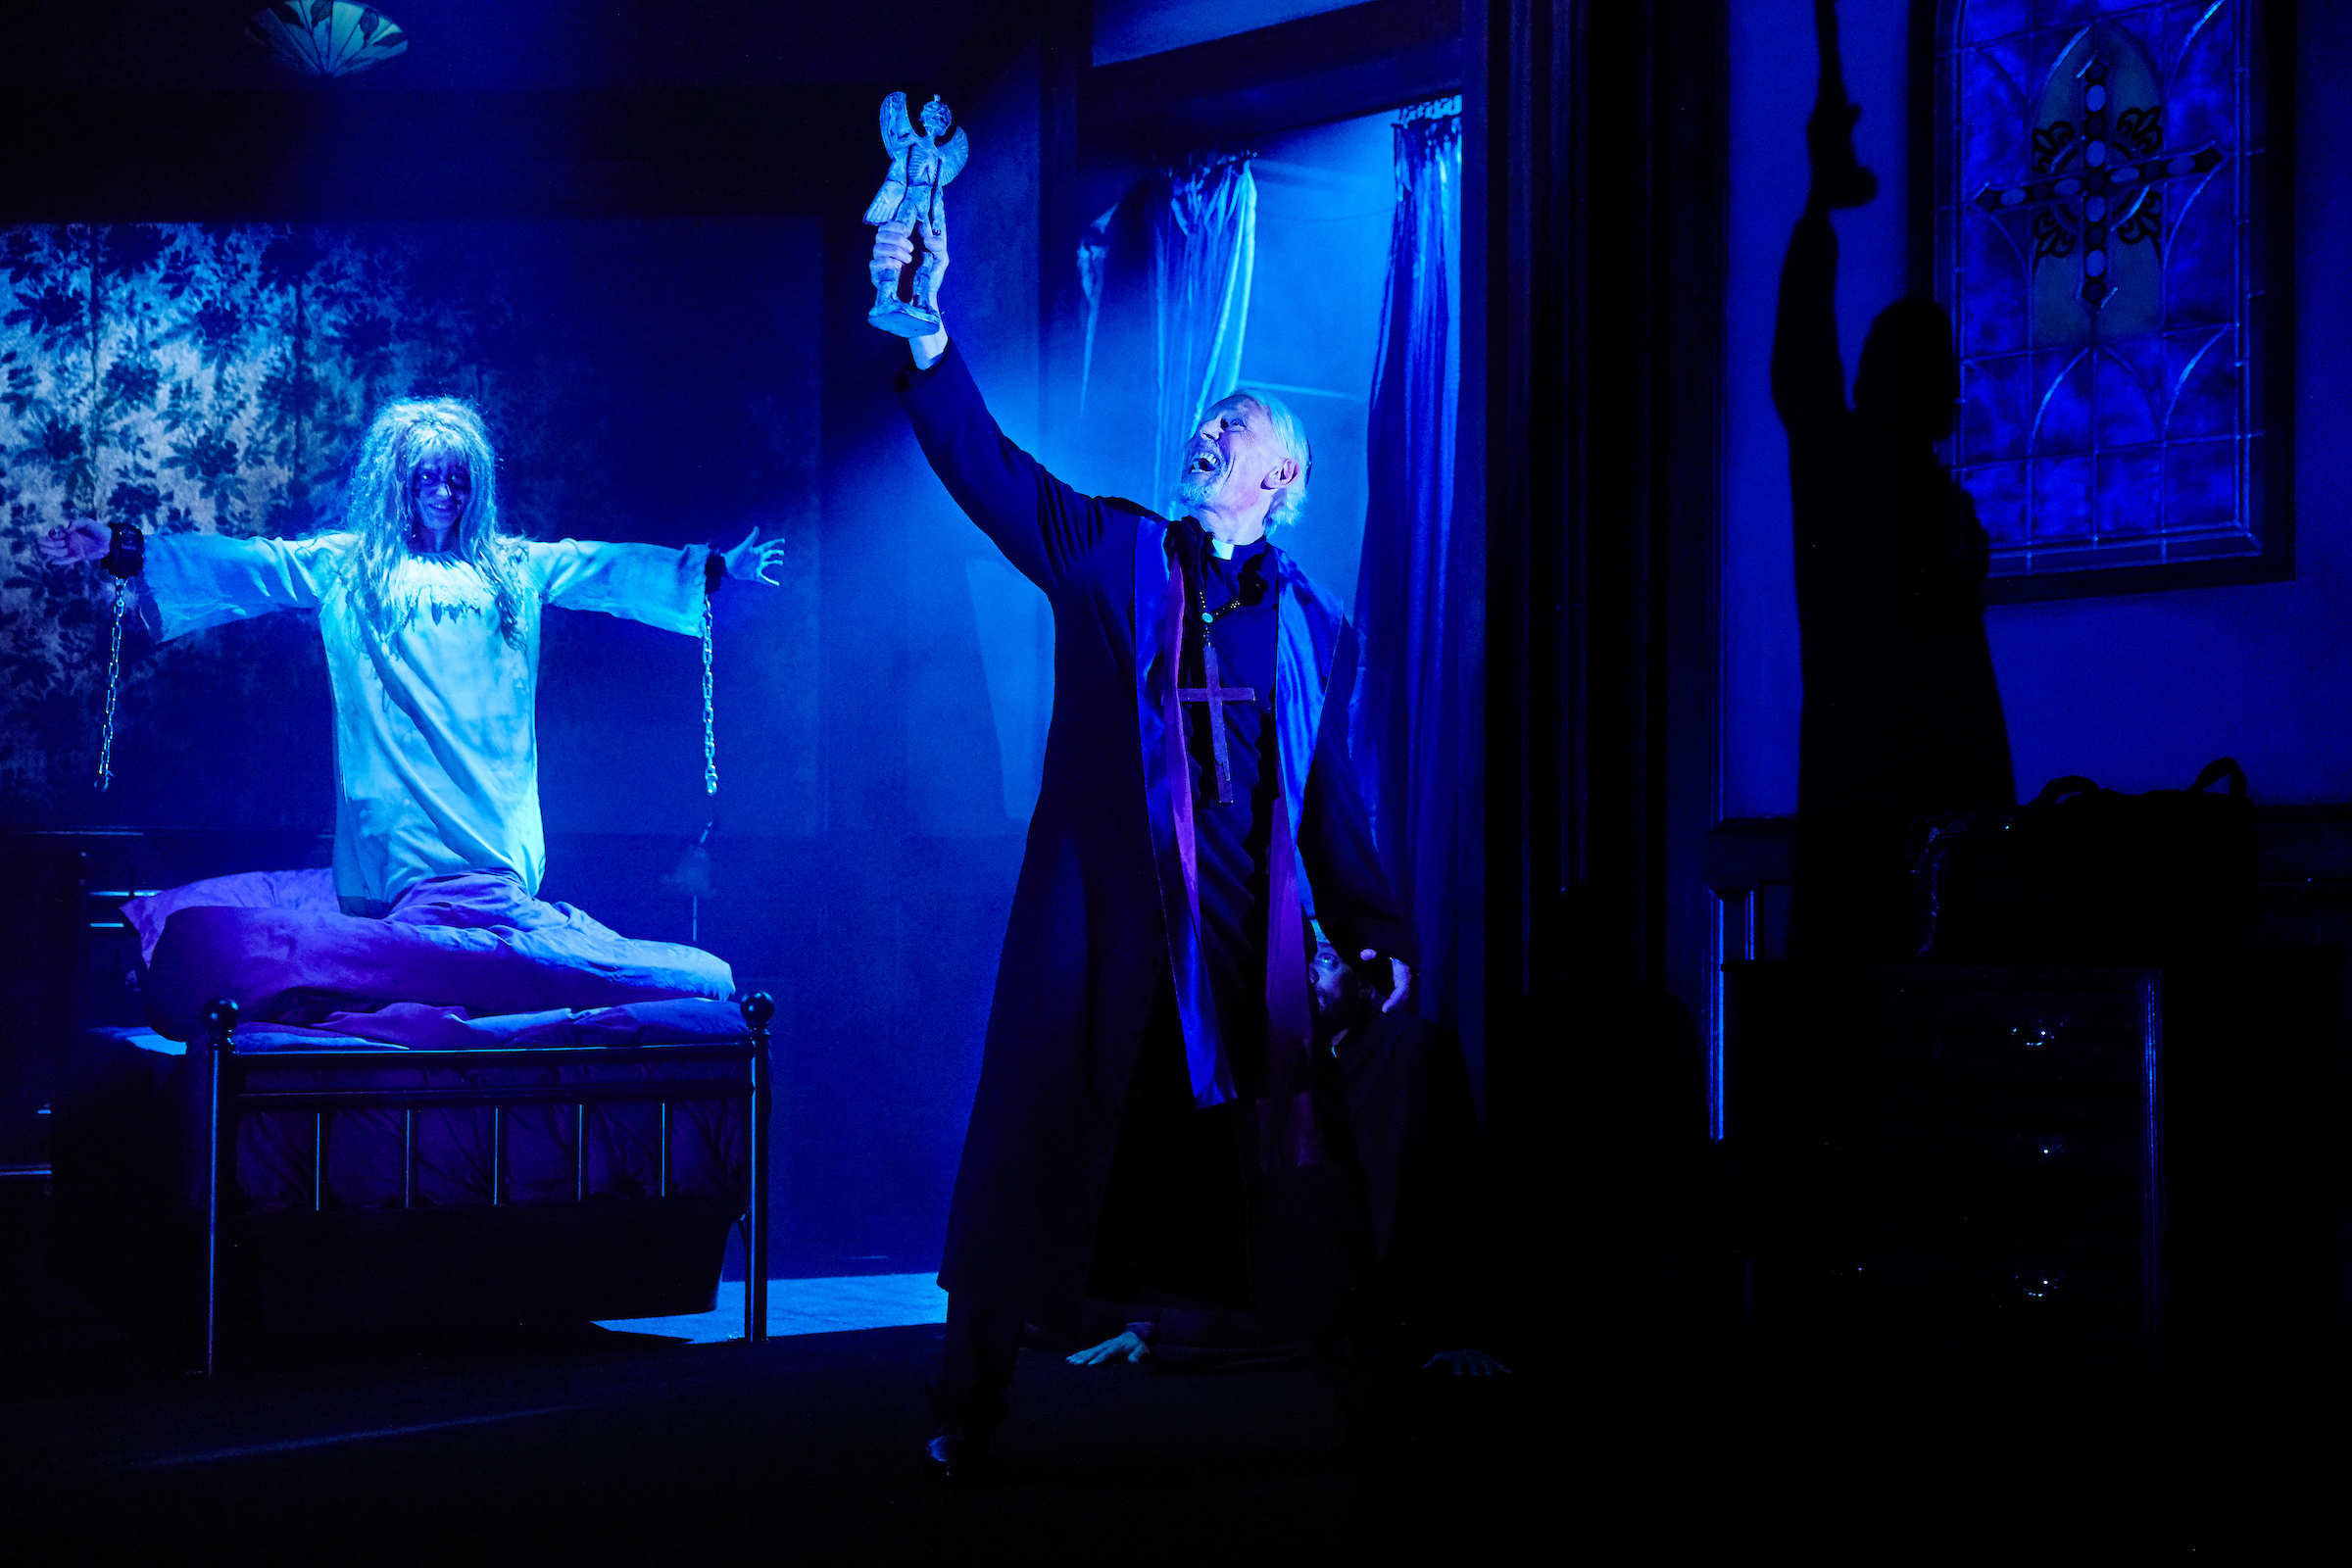 The Exorcist is coming to Inverness' Eden Court this November